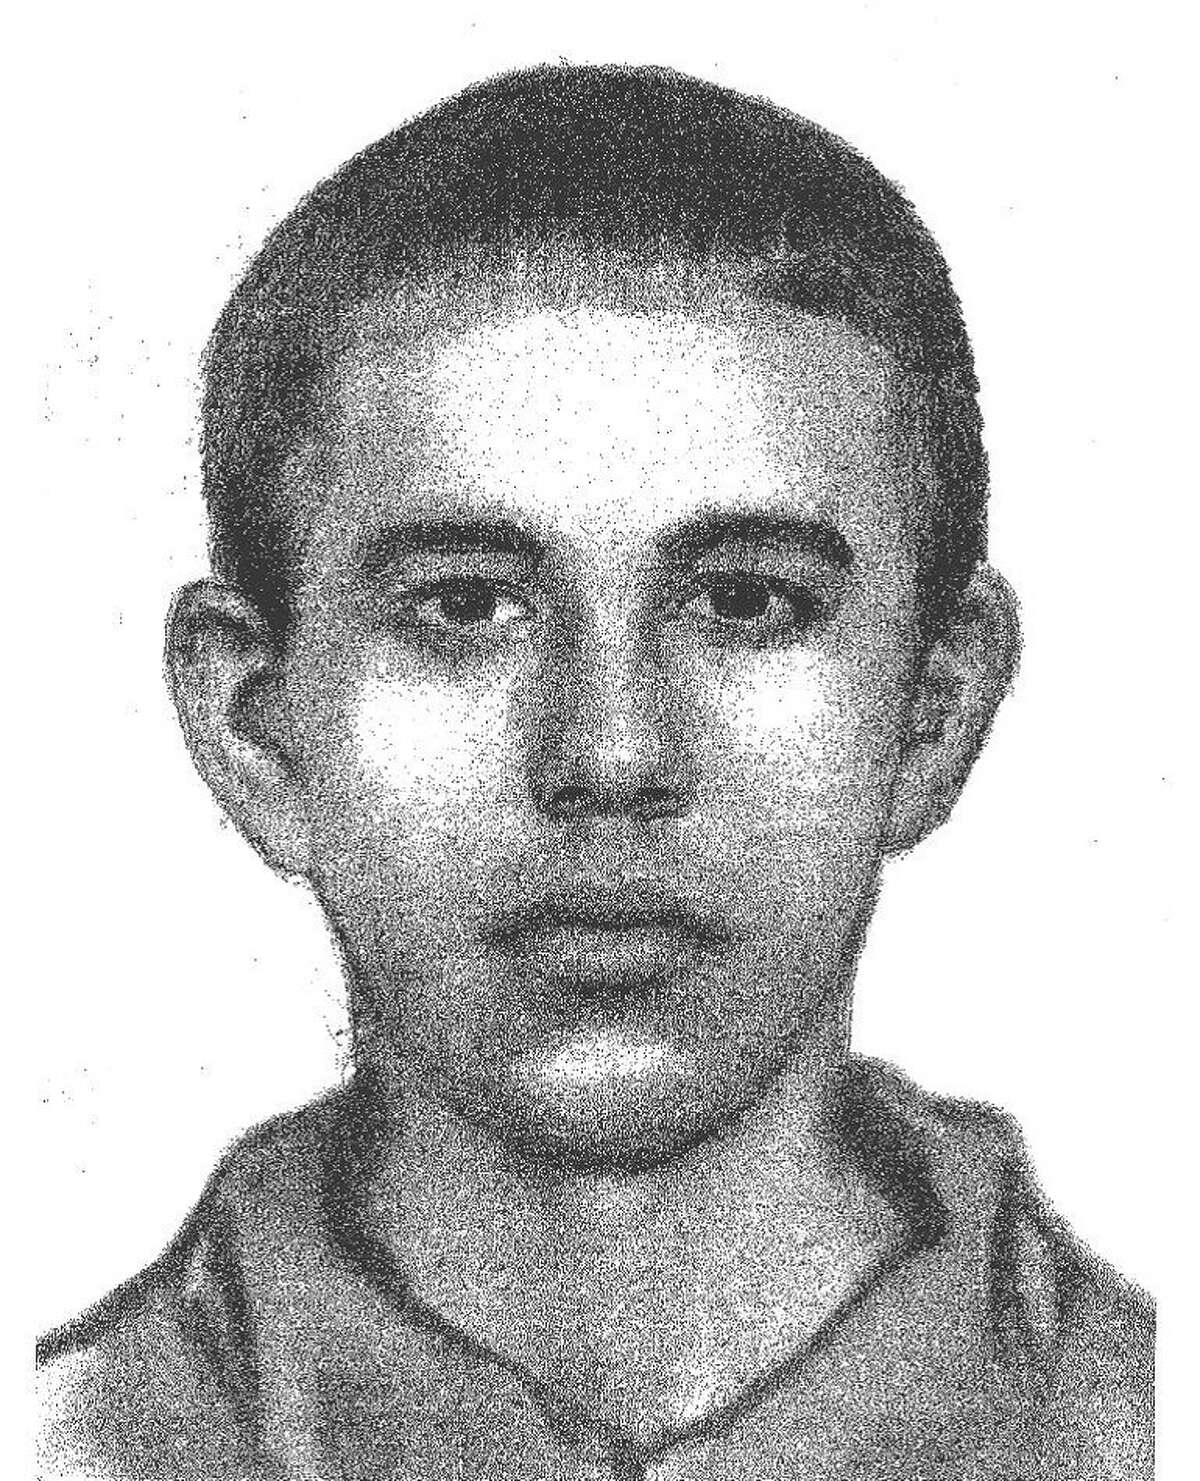 This is a composite sketch of a man wanted by Laredo police for questioning in connection with the killing of a 24-year-old man in February 2017.  